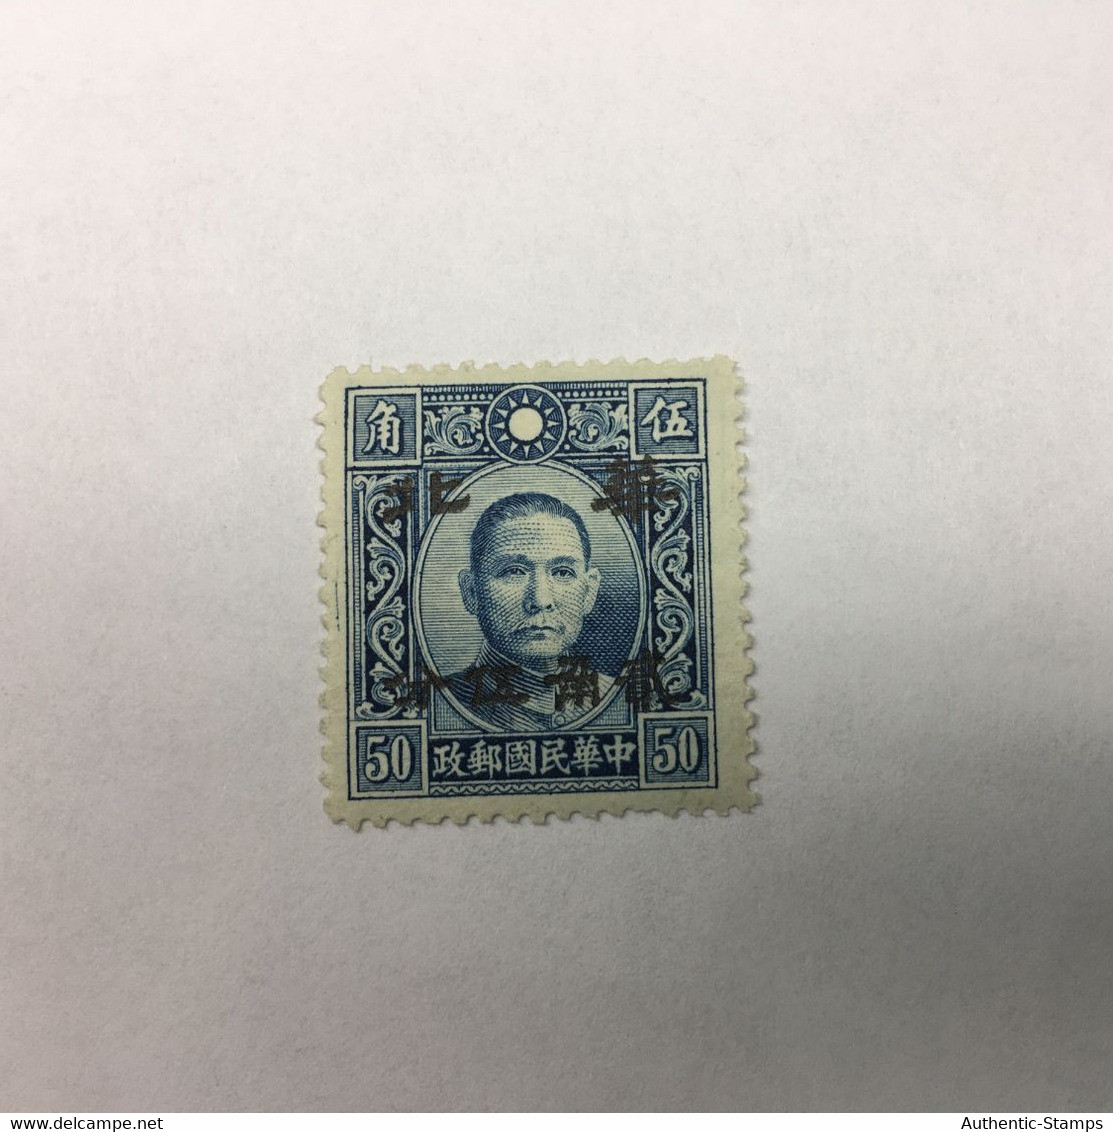 CHINA STAMP, USED, TIMBRO, STEMPEL, CINA, CHINE, LIST 5805 - 1941-45 Chine Du Nord